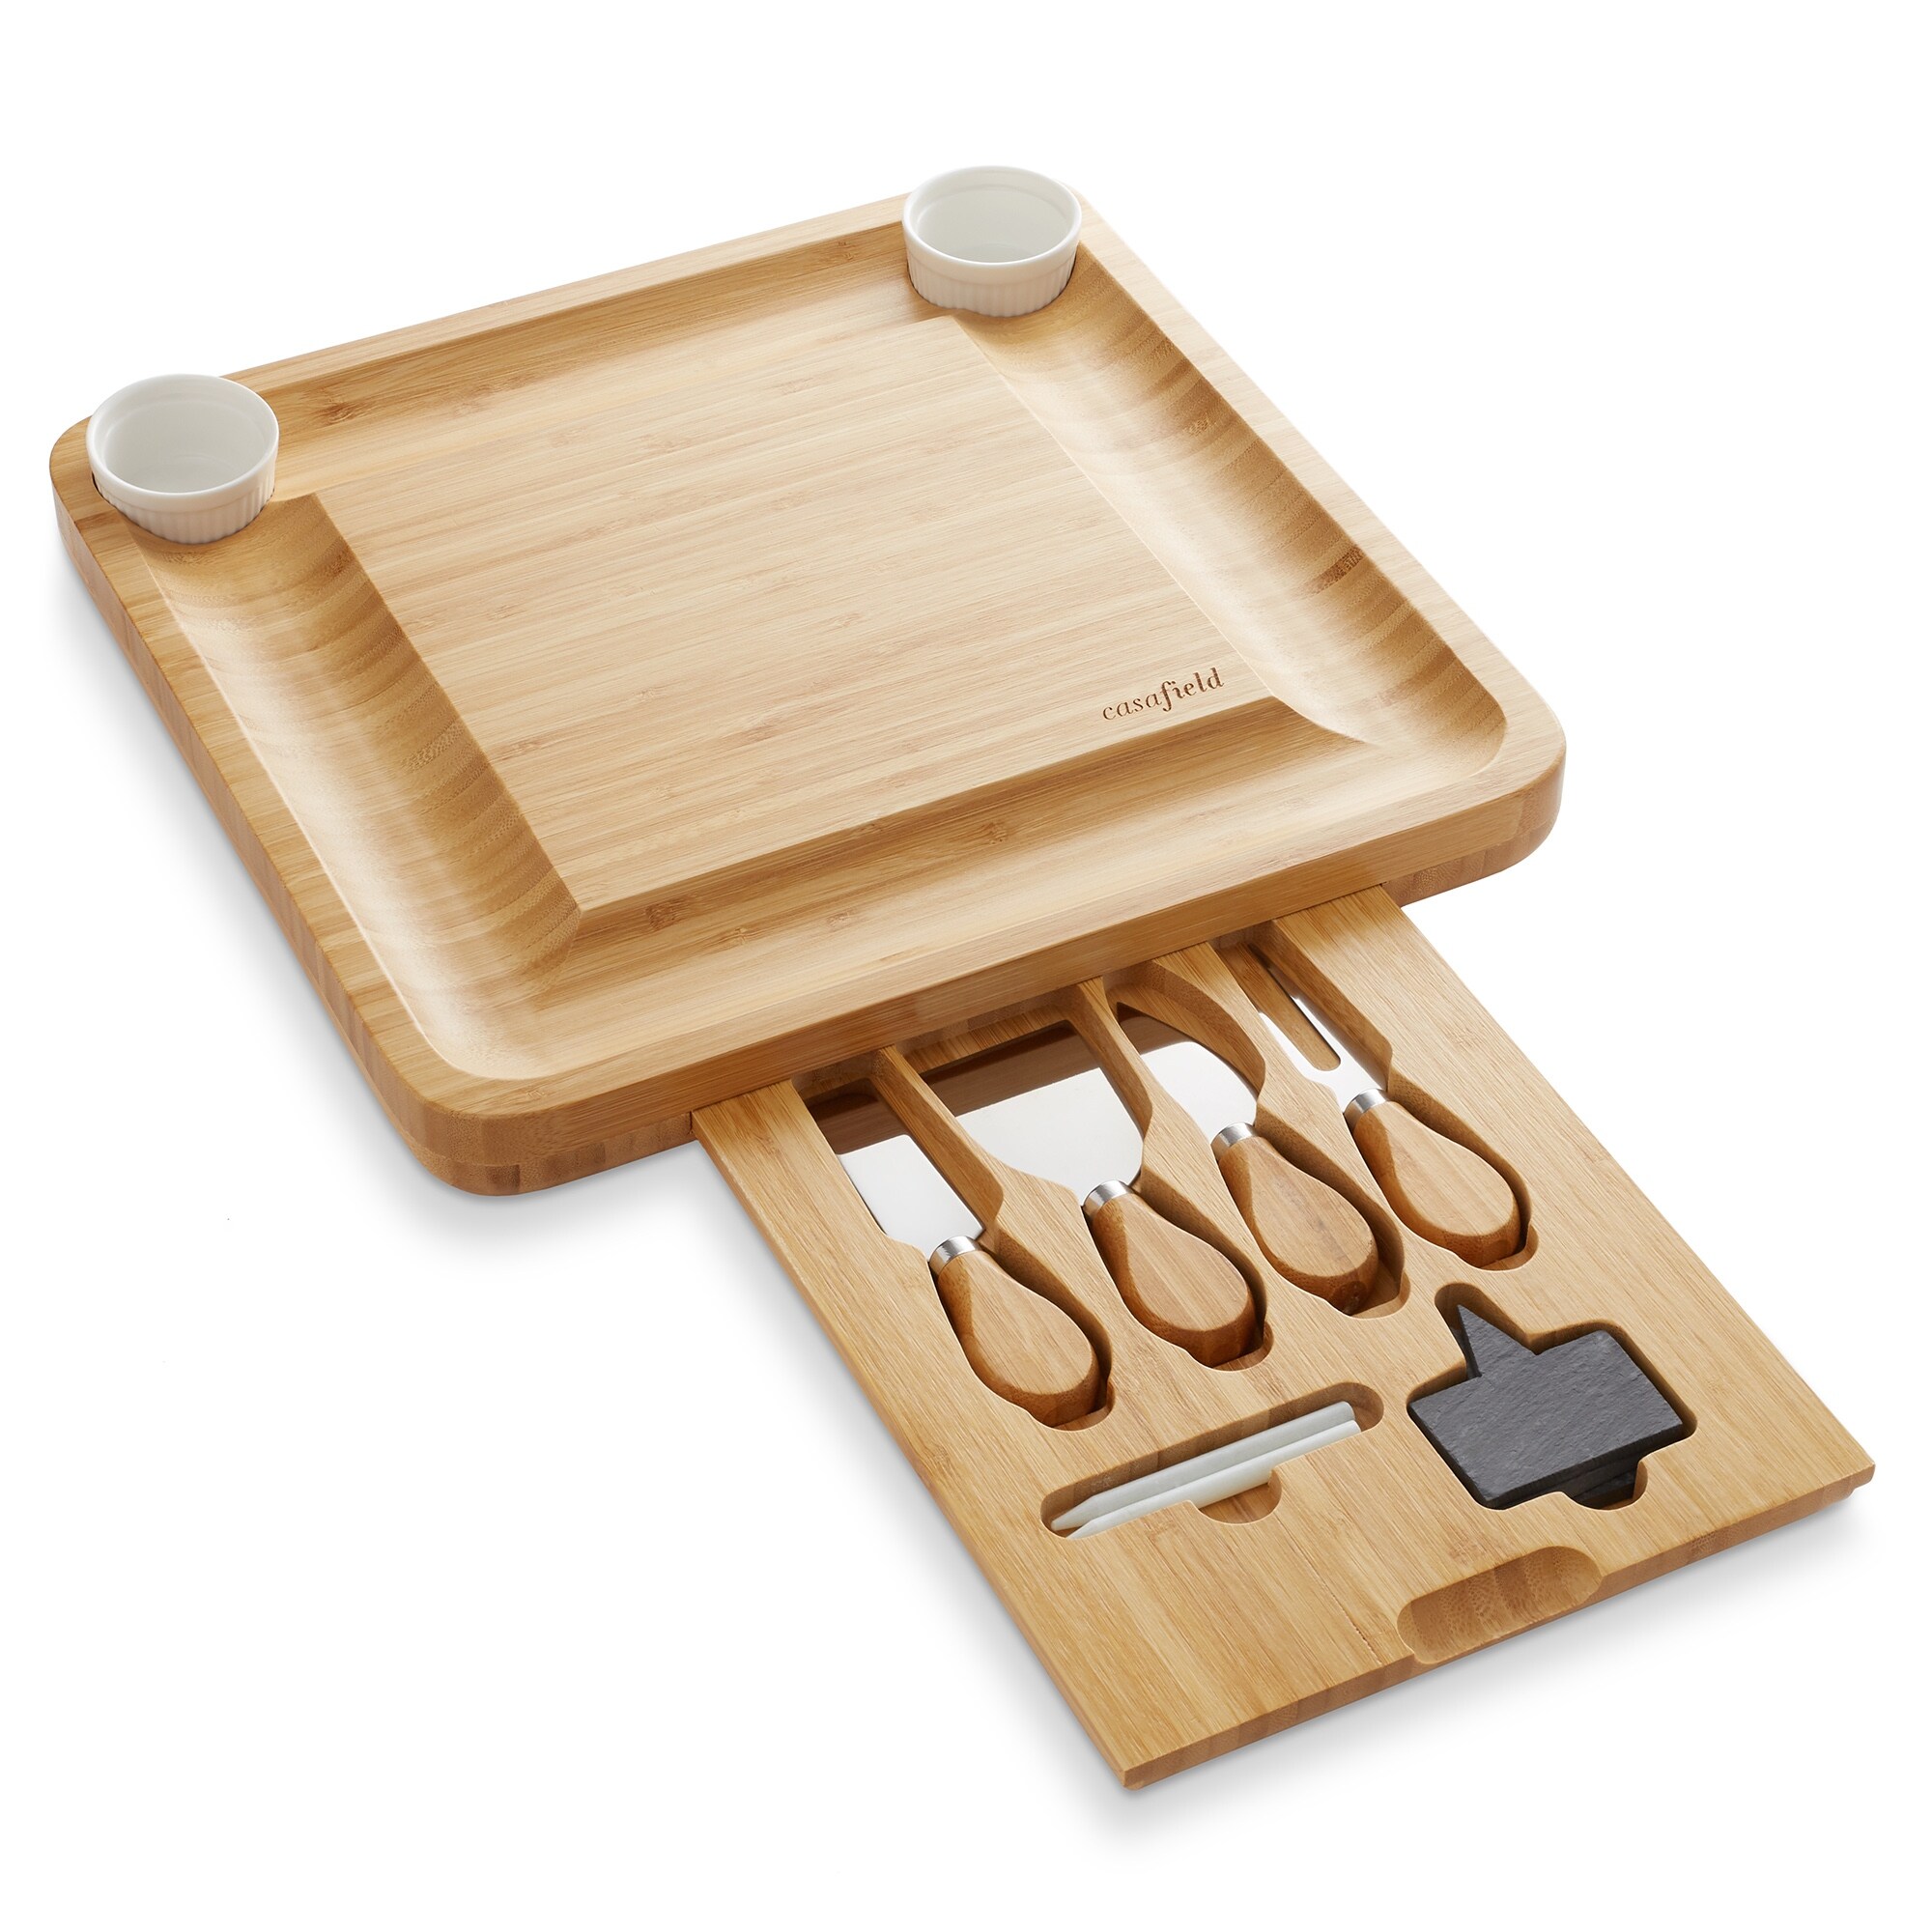 https://ak1.ostkcdn.com/images/products/is/images/direct/84dfad7aad3af95a1c3362c7319be7f5f0e016f7/Bamboo-Cheese-Board-Gift-Set-with-2-Bowls-%26-4-Knives-by-Casafield.jpg